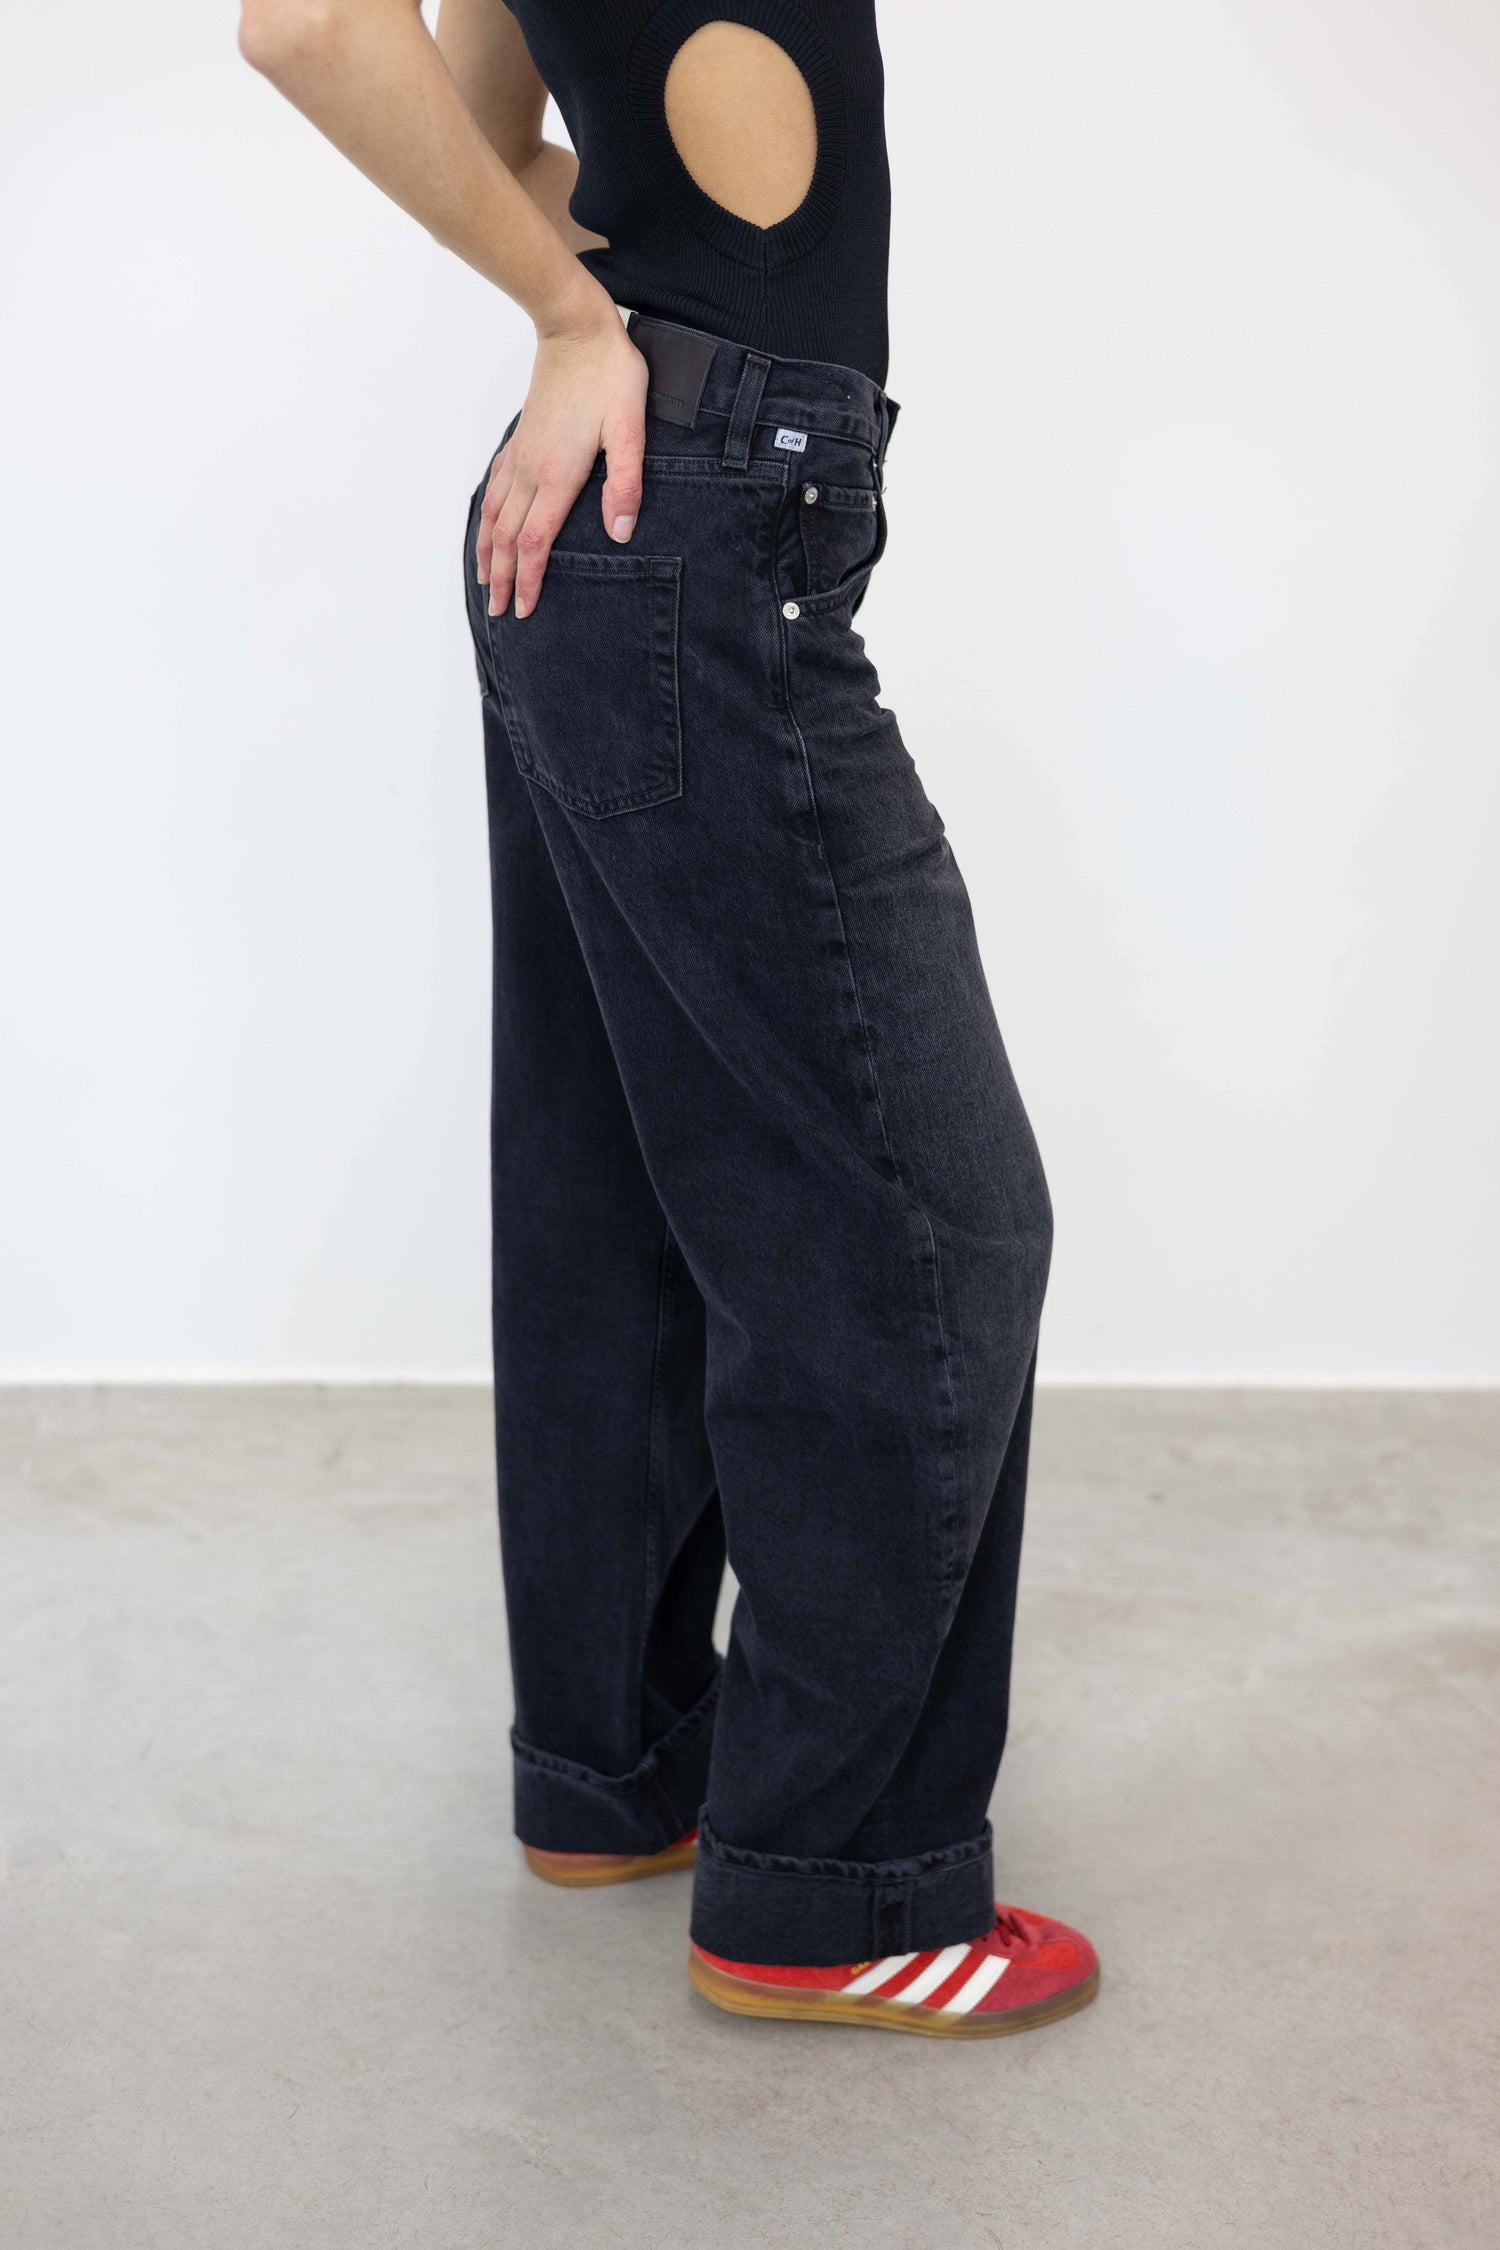 AYLA BAGGY CUFFED JEANS IN VOILA JEANS CITIZENS OF HUMANITY 